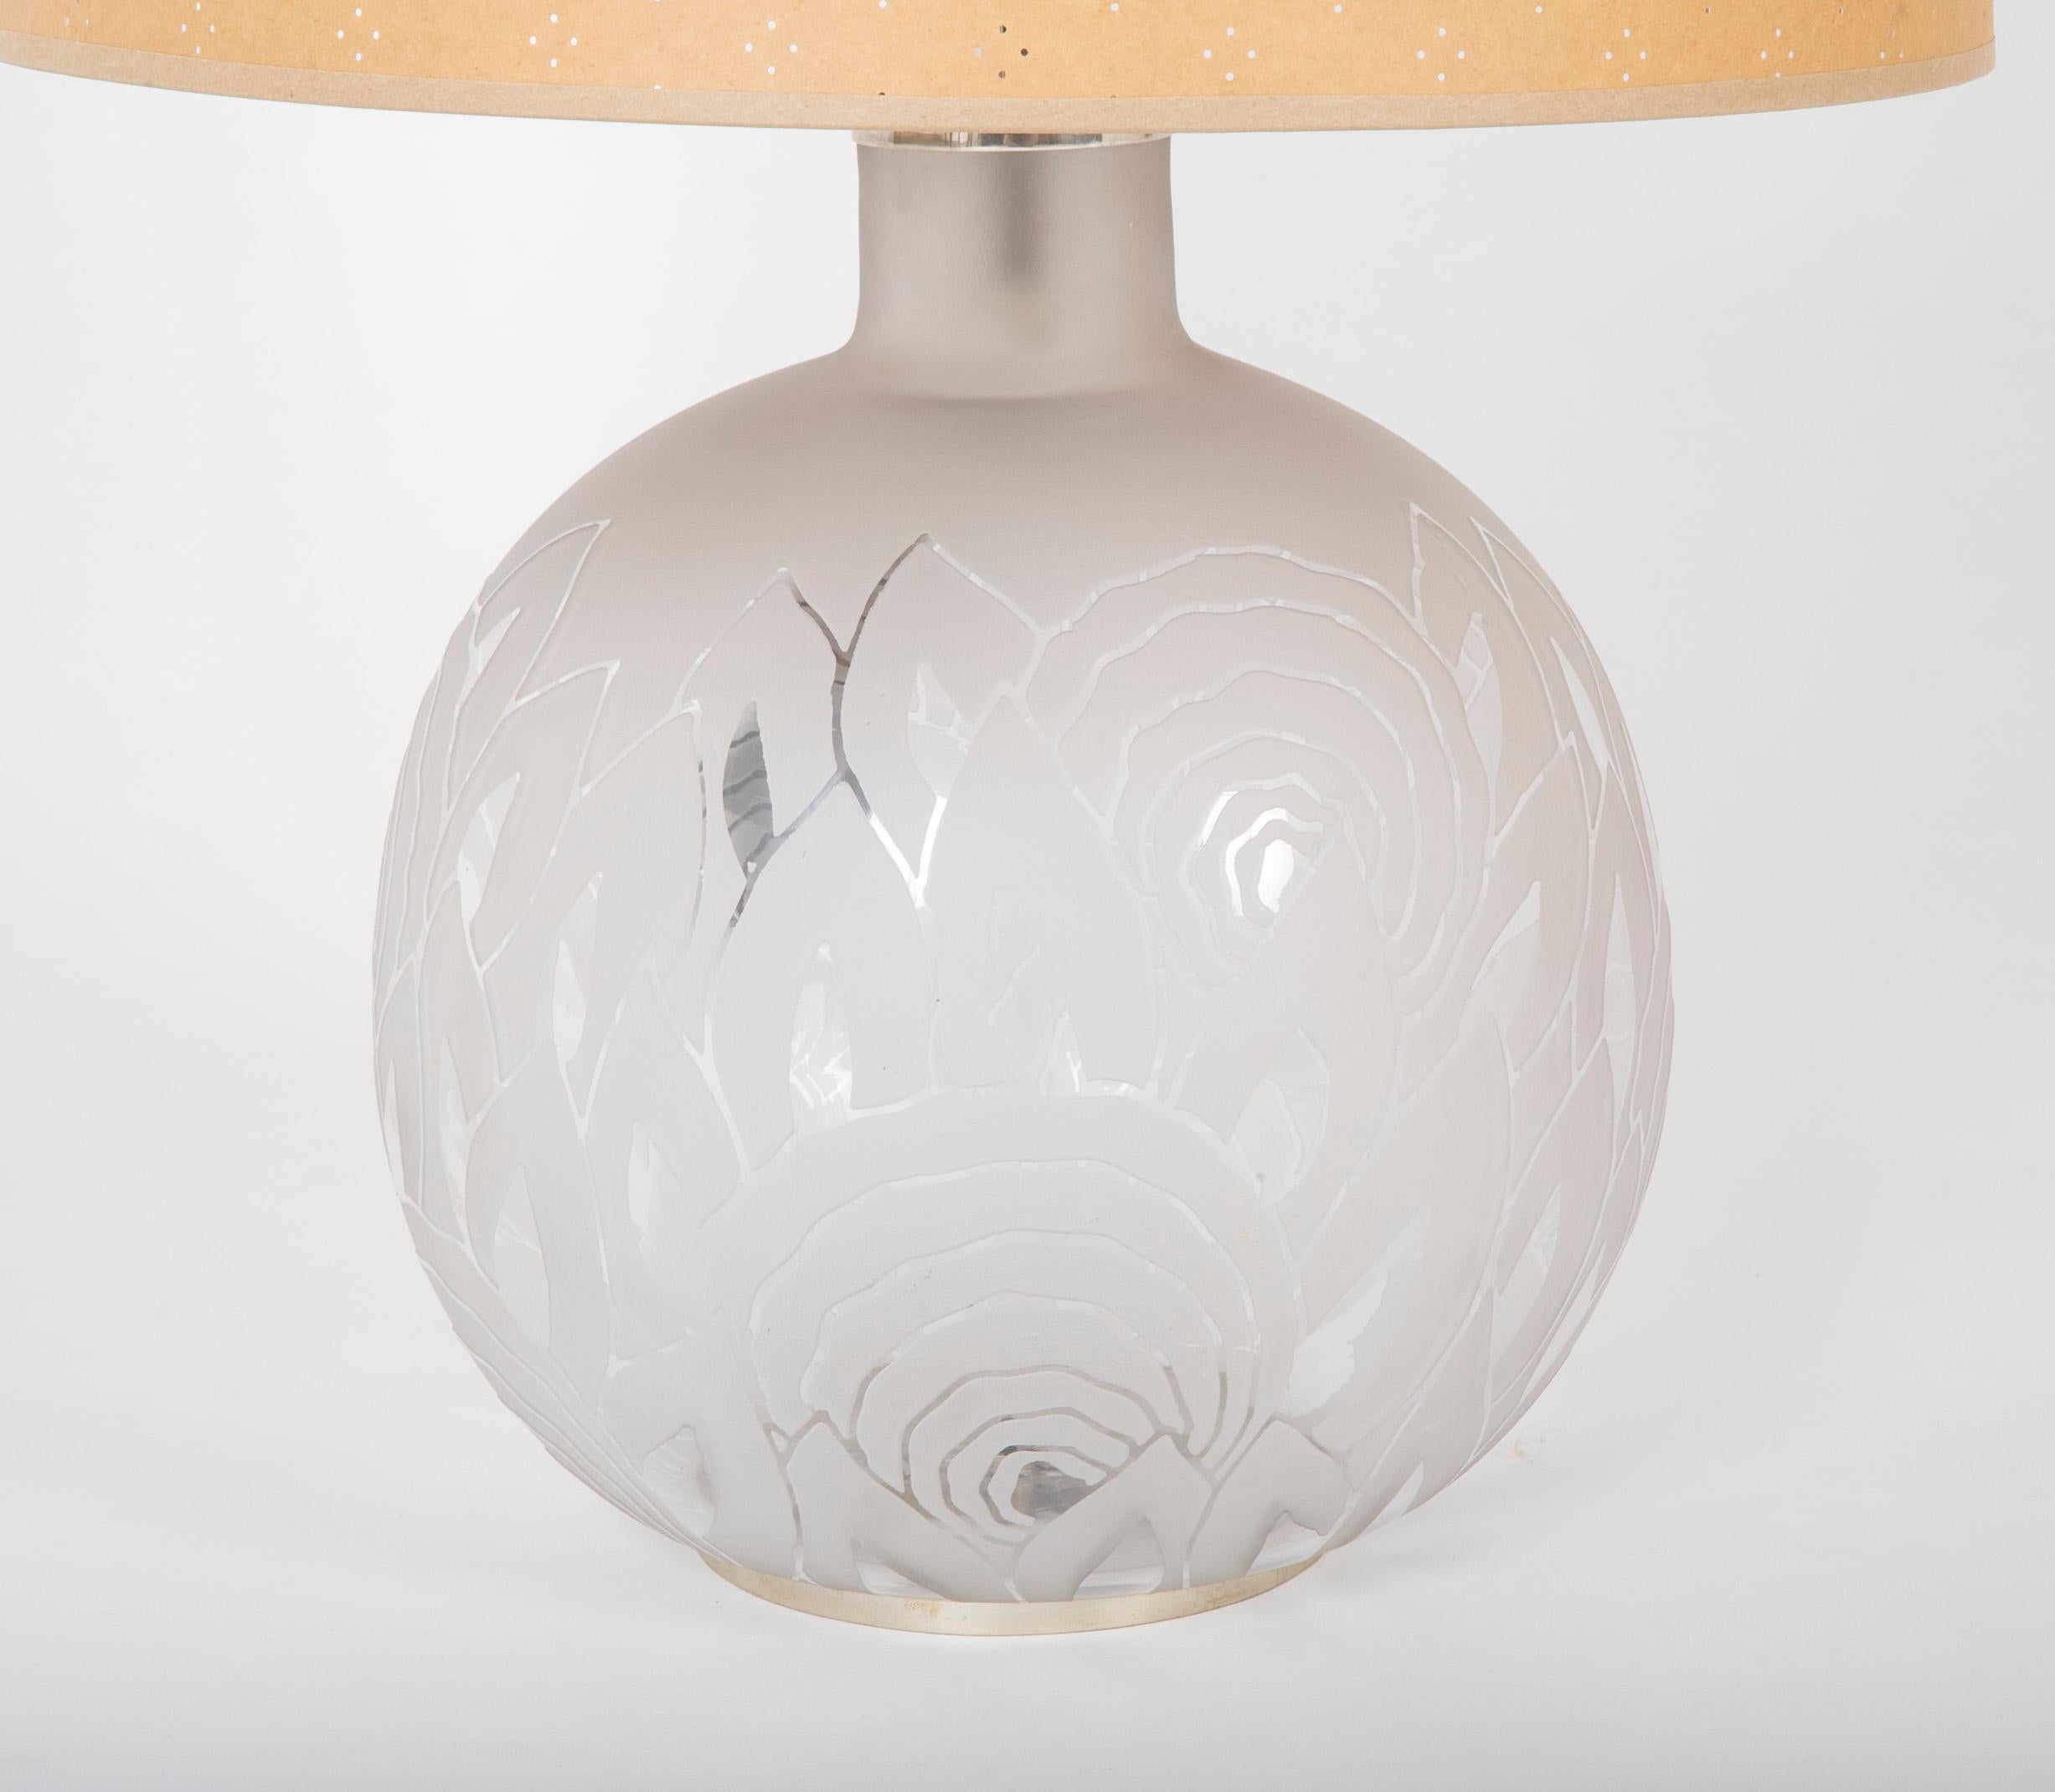 A wornderfully exicuted acid etched glass lamp with nickle plated mounts byJean Boris Lacroix ( France., 1902 - 1984 ). The attention to detail carrys on to the etched signature and asemetrical mounting on the base. The lamp is dated 1929 and has